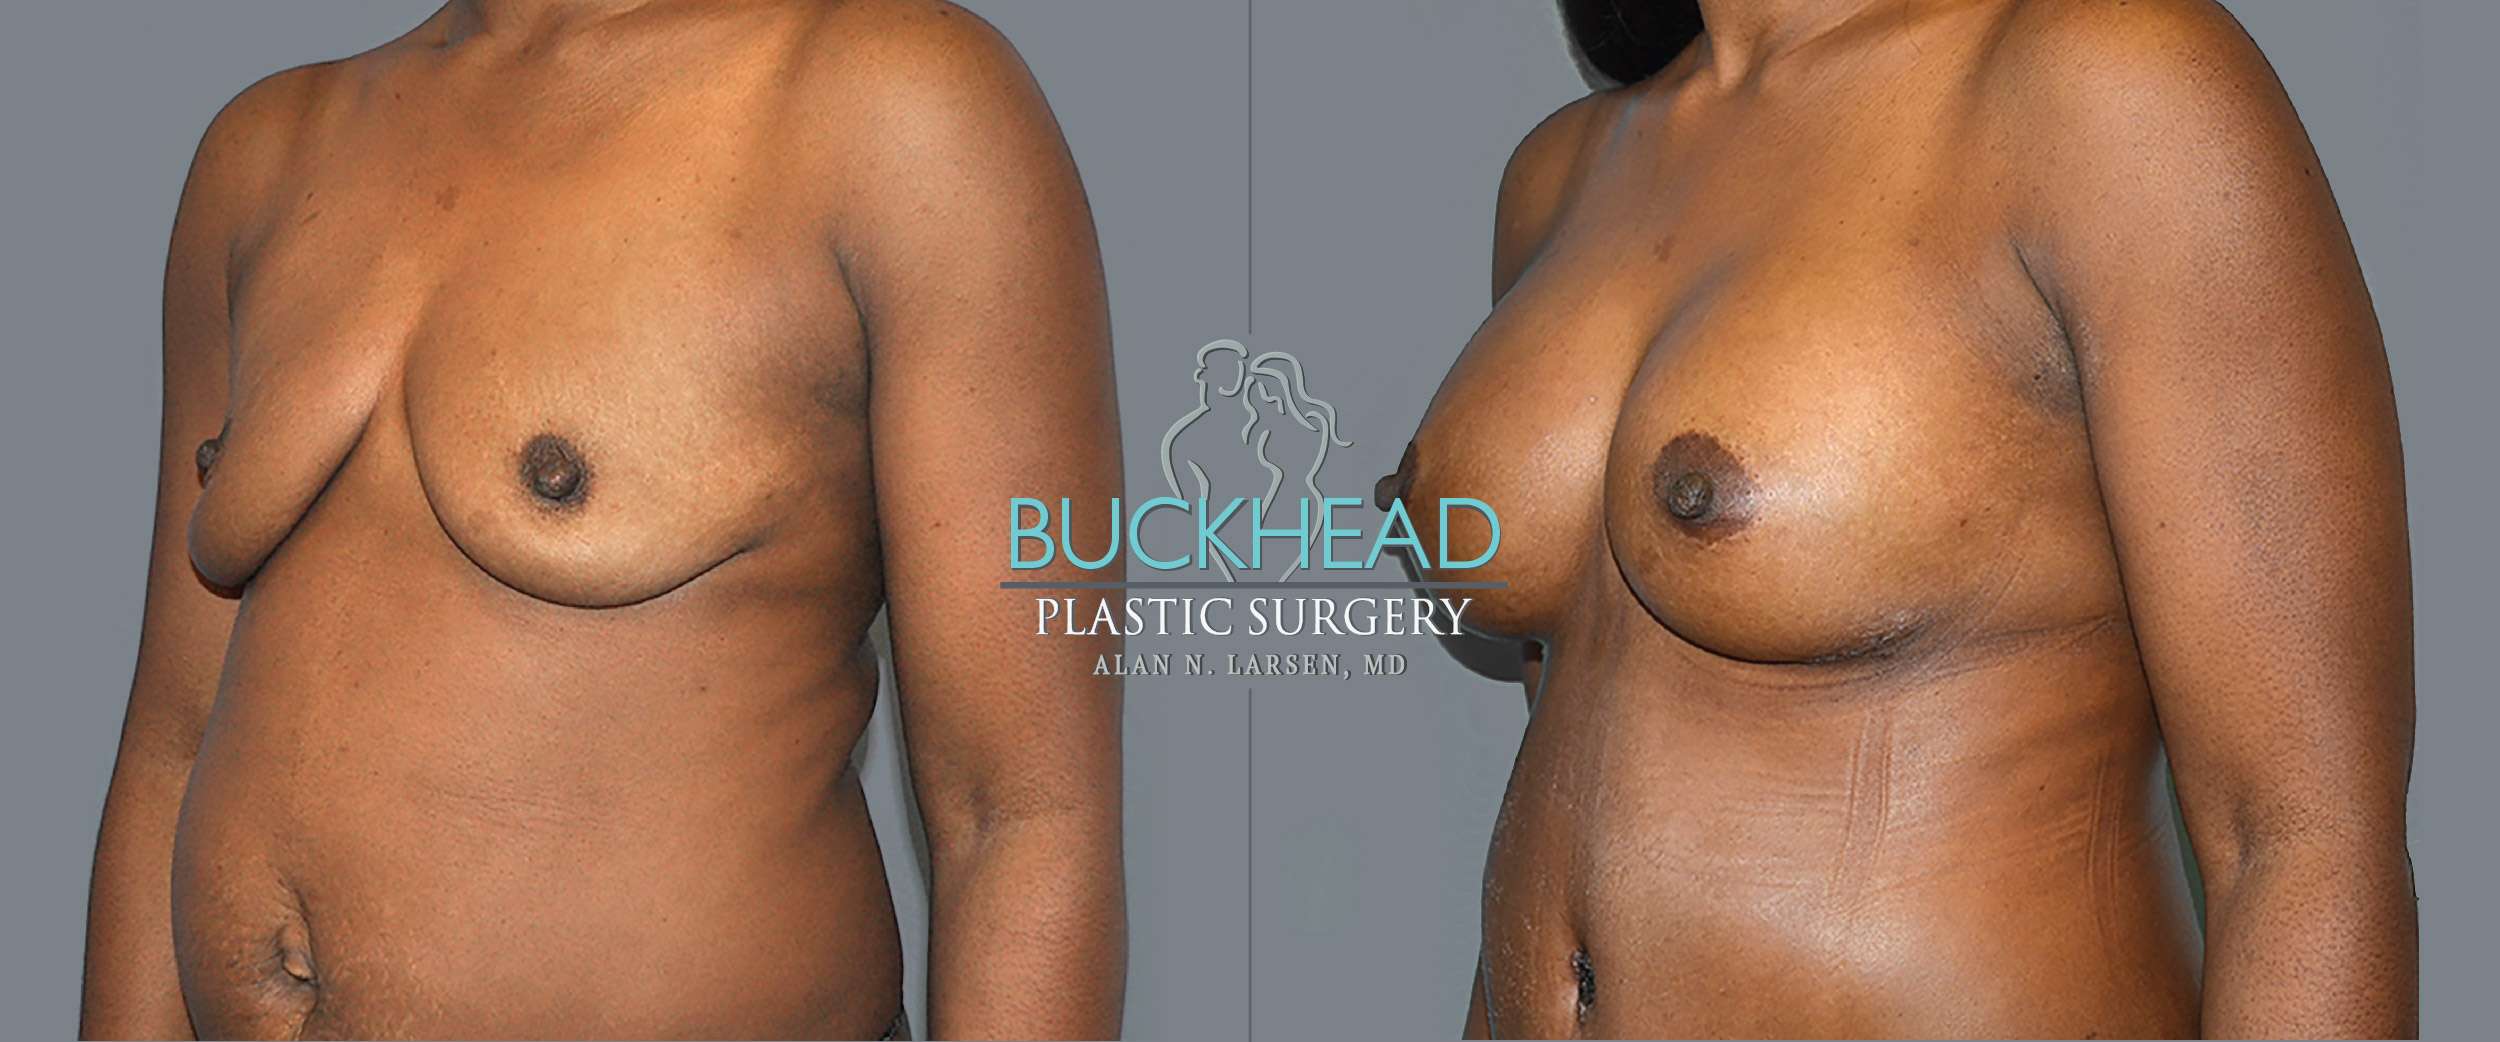 Before and After Photo gallery | Breast Augmentation | Buckhead Plastic Surgery | Double Board-Certified Plastic Surgeon in Atlanta GA